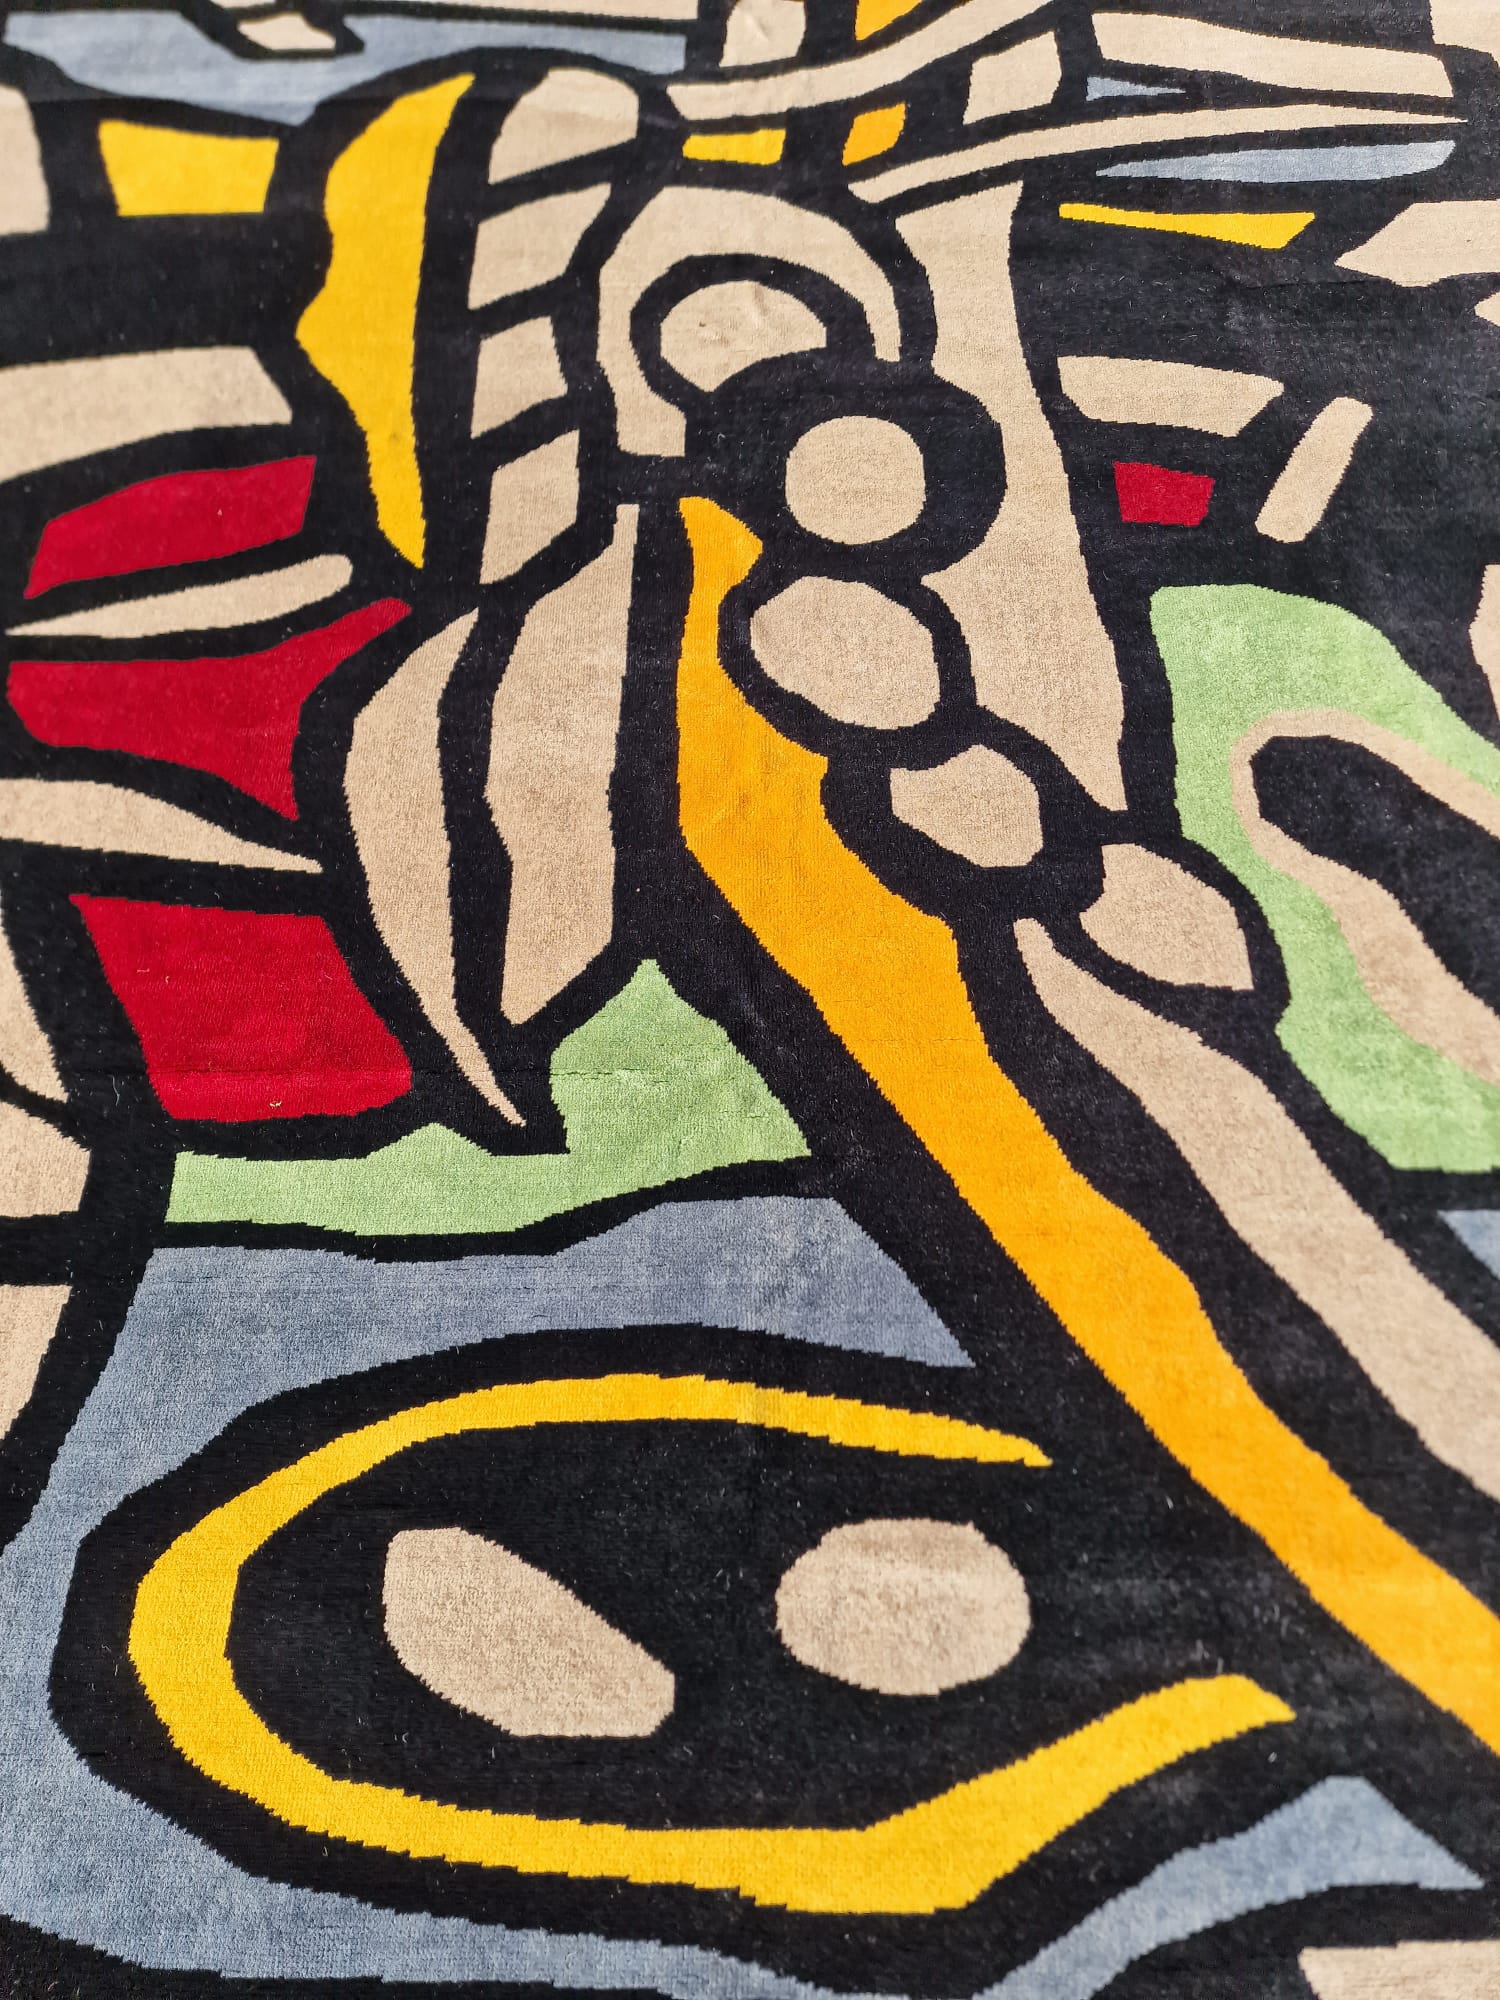 Fernand LEGER (after) "Composition abstraite" Wool tapestry. - Image 3 of 6